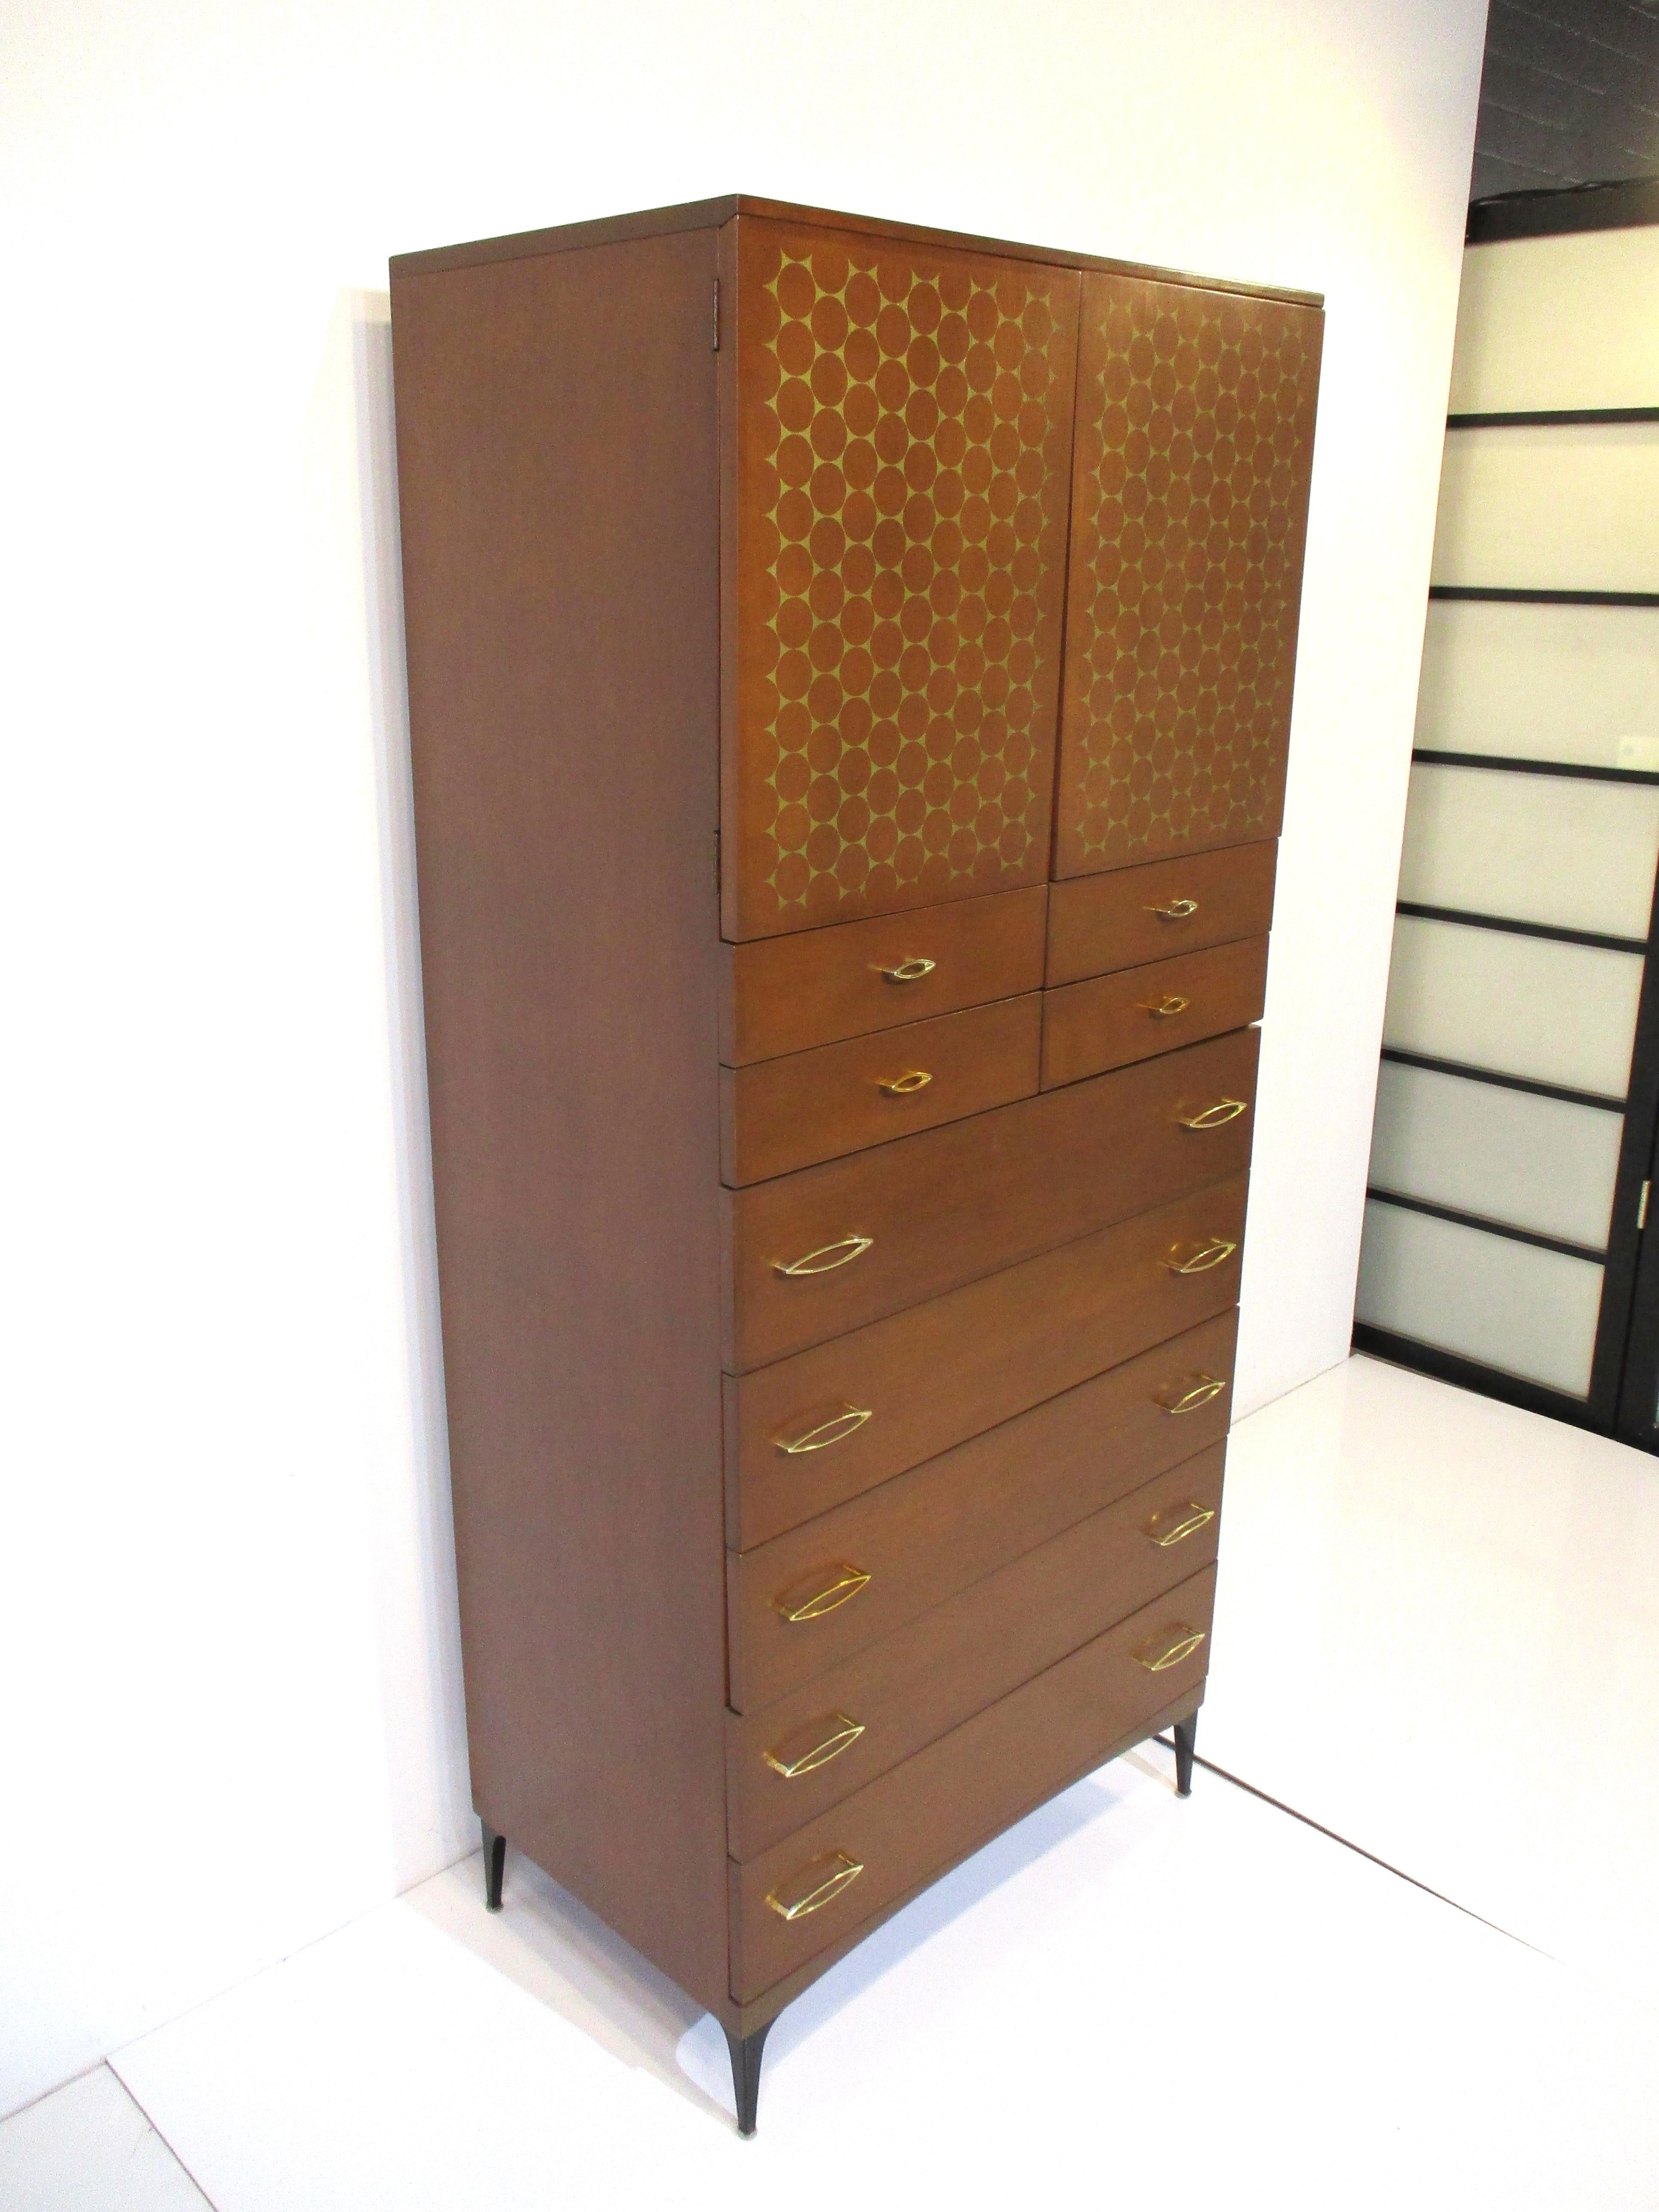 A stunning tall double semainer dresser chest with two upper push doors, inside one adjustable shelve and storage and the front face having gold imprinted designs. Below four smaller drawers and five larger drawer with cast gold toned handles giving